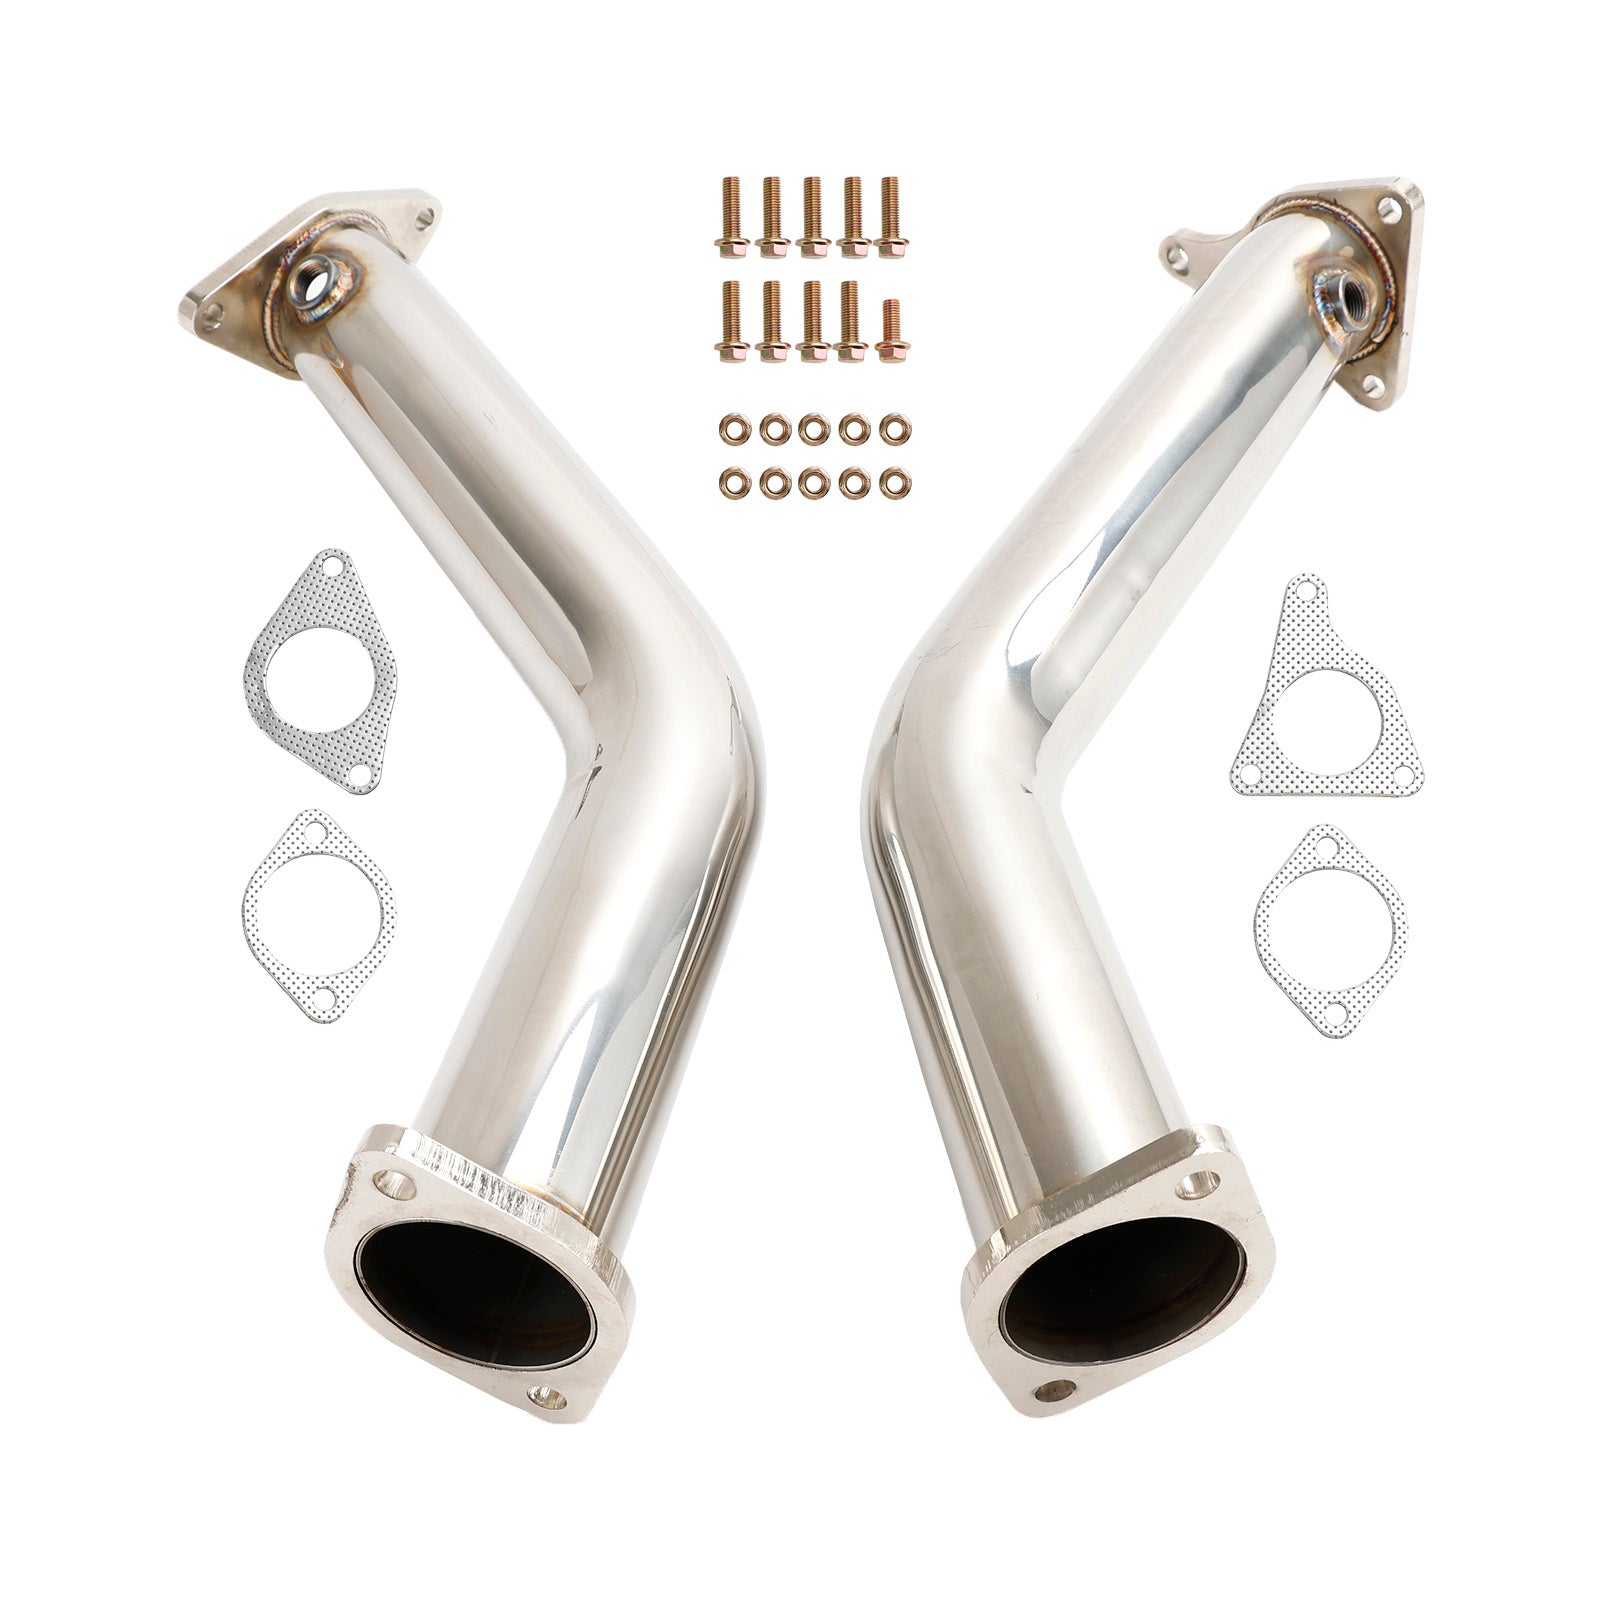 Infiniti 2017+ Q60 / 2016+ Q50 VR30 Stainless Steel Exhaust Racing Downpipe